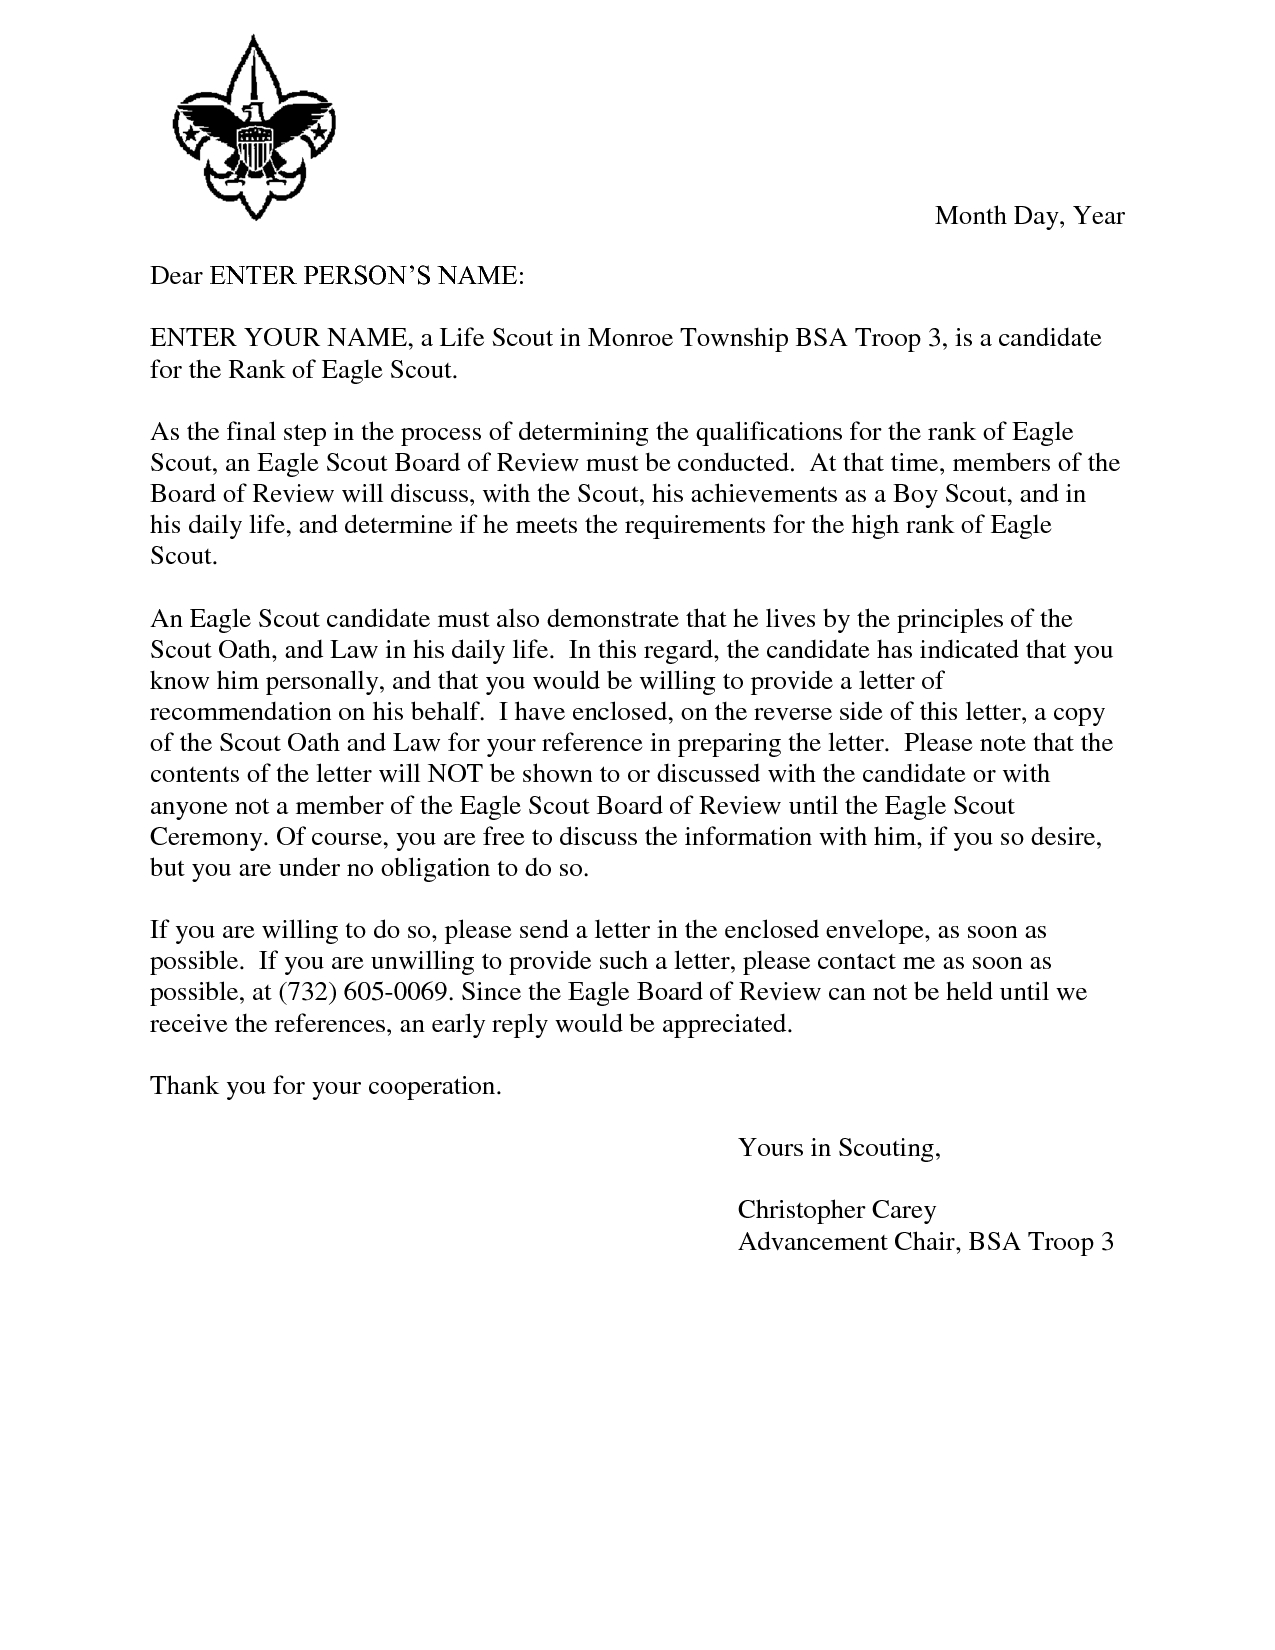 Template for A Letter Of Recommendation for A Student - Eagle Scout Reference Request Sample Letter Doc 7 by Hfr990q